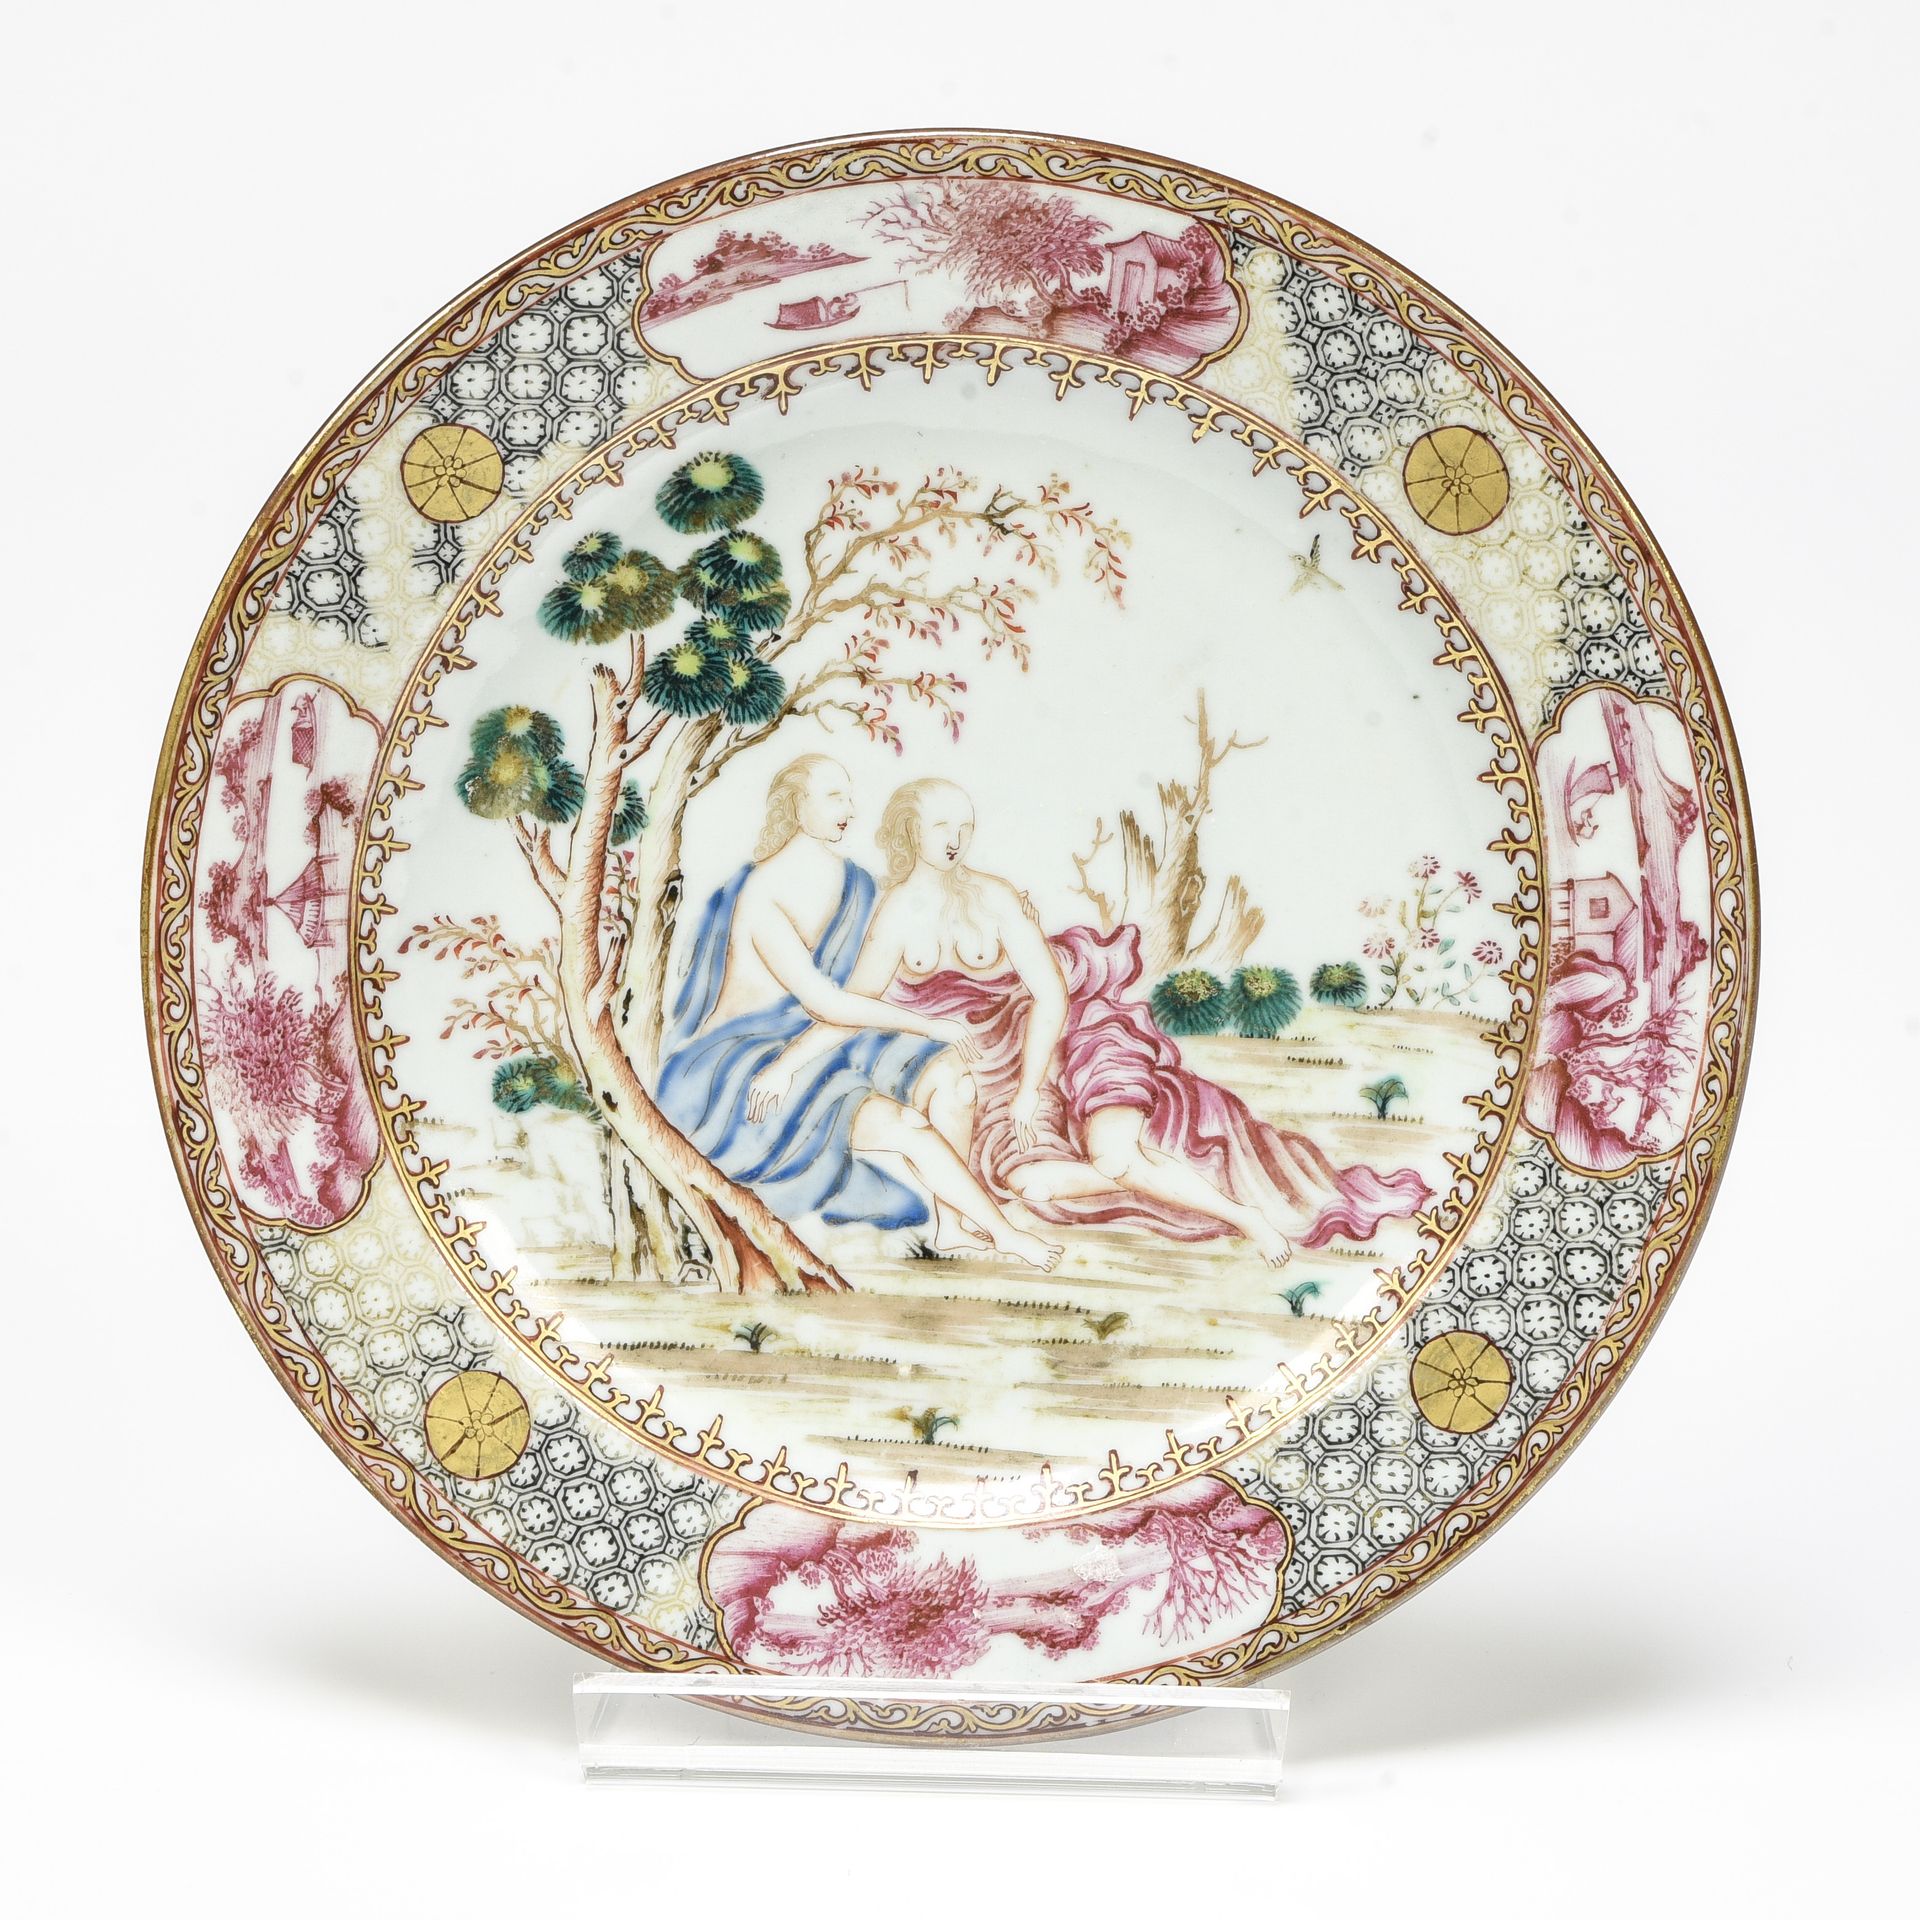 Null Plate

CHINA, INDIA COMPANY - QIANLONG ERA (1736-1795)

Famille Rose polych&hellip;